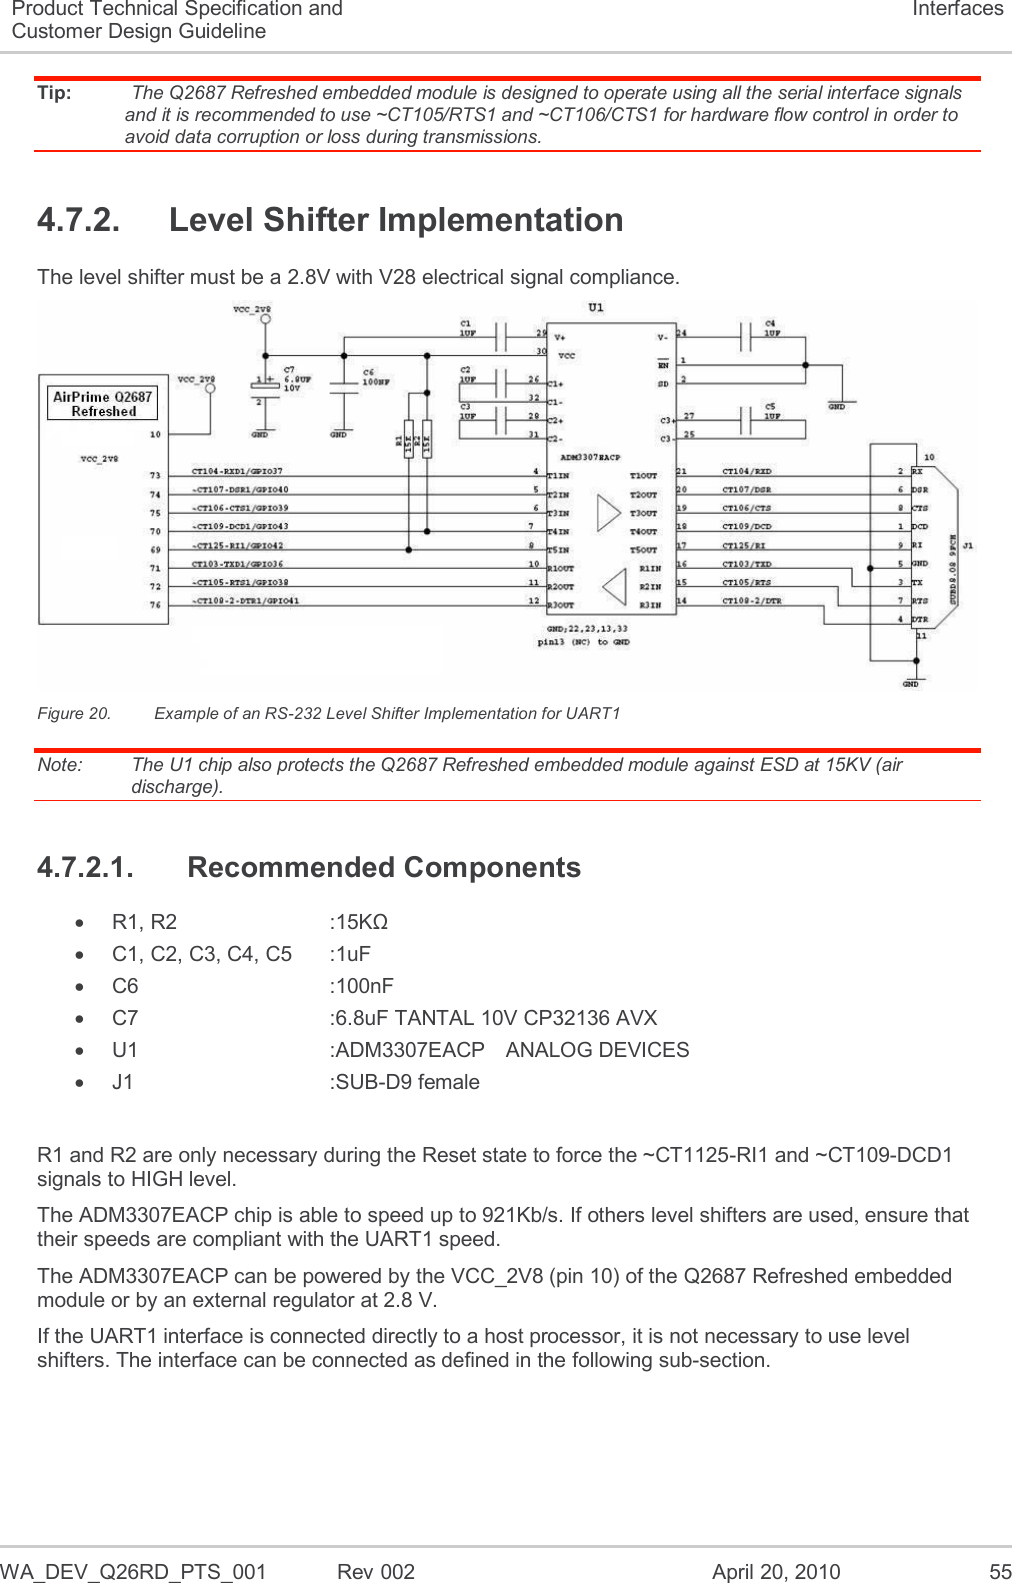  WA_DEV_Q26RD_PTS_001  Rev 002  April 20, 2010 55 Product Technical Specification and Customer Design Guideline Interfaces Tip:   The Q2687 Refreshed embedded module is designed to operate using all the serial interface signals and it is recommended to use ~CT105/RTS1 and ~CT106/CTS1 for hardware flow control in order to avoid data corruption or loss during transmissions. 4.7.2.  Level Shifter Implementation The level shifter must be a 2.8V with V28 electrical signal compliance.  Figure 20.  Example of an RS-232 Level Shifter Implementation for UART1 Note:   The U1 chip also protects the Q2687 Refreshed embedded module against ESD at 15KV (air discharge). 4.7.2.1.  Recommended Components   R1, R2      :15KΩ   C1, C2, C3, C4, C5  :1uF  C6        :100nF  C7        :6.8uF TANTAL 10V CP32136 AVX  U1        :ADM3307EACP  ANALOG DEVICES   J1        :SUB-D9 female   R1 and R2 are only necessary during the Reset state to force the ~CT1125-RI1 and ~CT109-DCD1 signals to HIGH level.  The ADM3307EACP chip is able to speed up to 921Kb/s. If others level shifters are used, ensure that their speeds are compliant with the UART1 speed. The ADM3307EACP can be powered by the VCC_2V8 (pin 10) of the Q2687 Refreshed embedded module or by an external regulator at 2.8 V. If the UART1 interface is connected directly to a host processor, it is not necessary to use level shifters. The interface can be connected as defined in the following sub-section. 